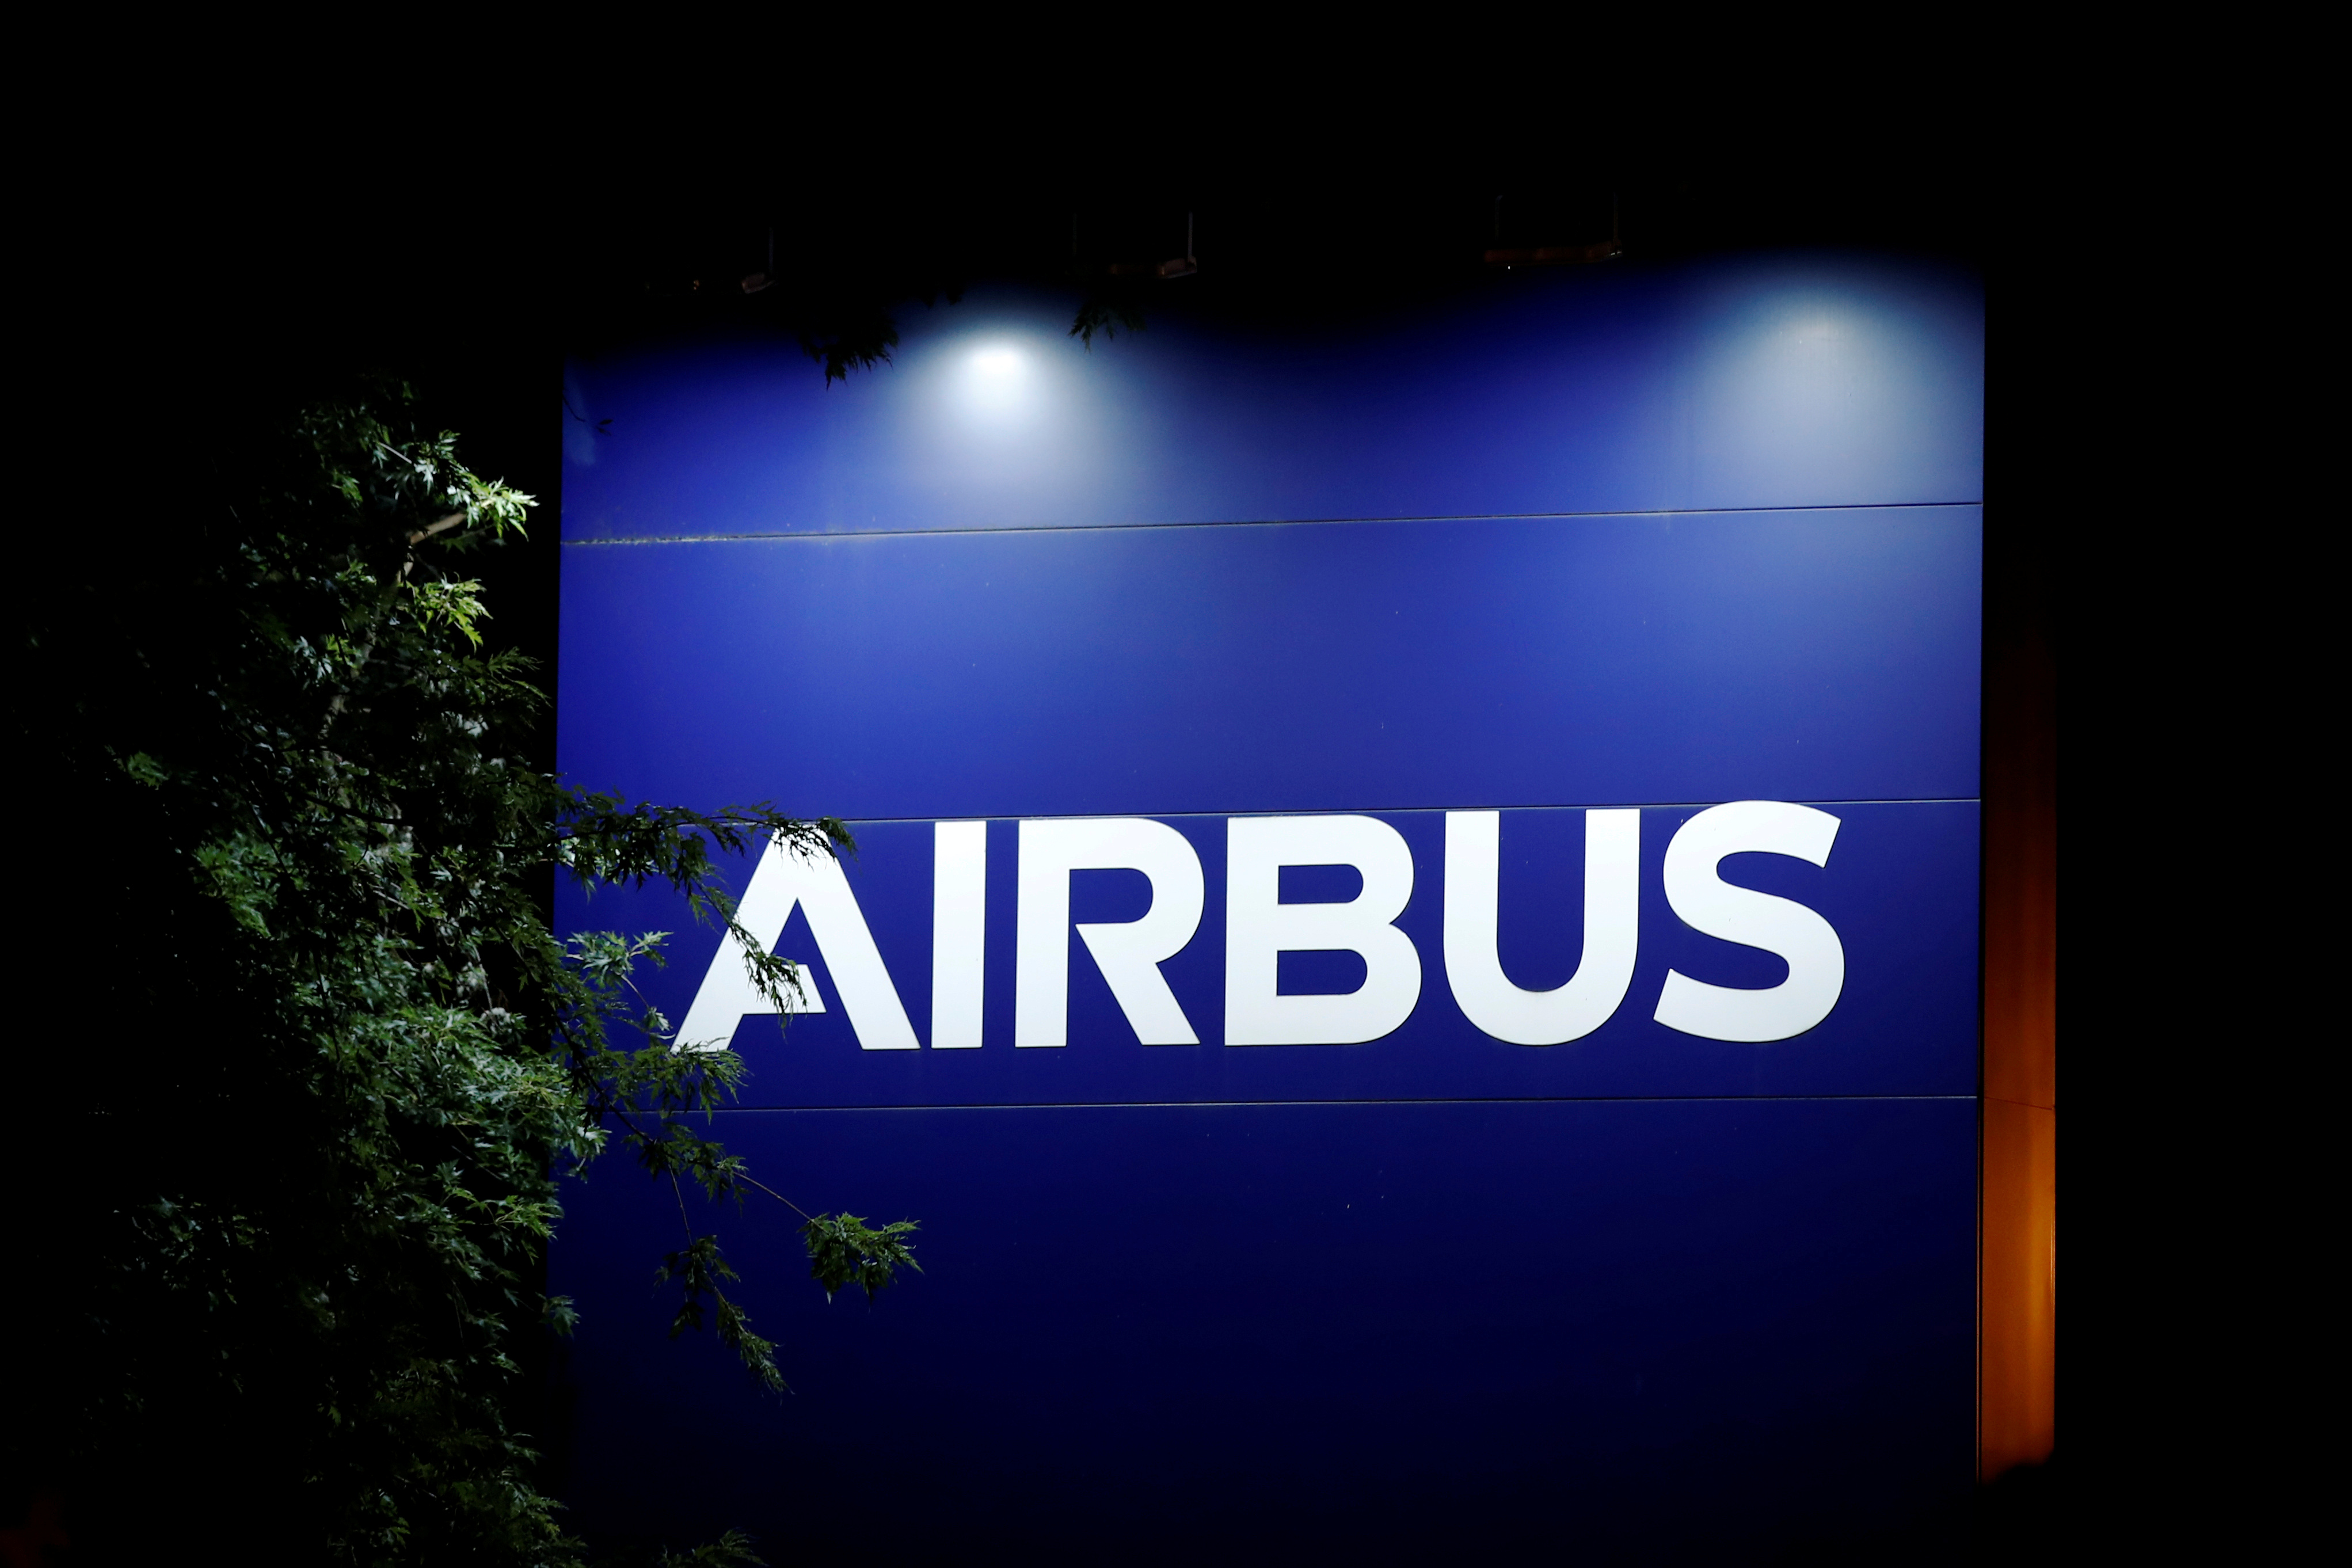 A logo of Airbus is seen at the entrance of its factory in Blagnac near Toulouse, France, July 2, 2020. REUTERS/Benoit Tessier